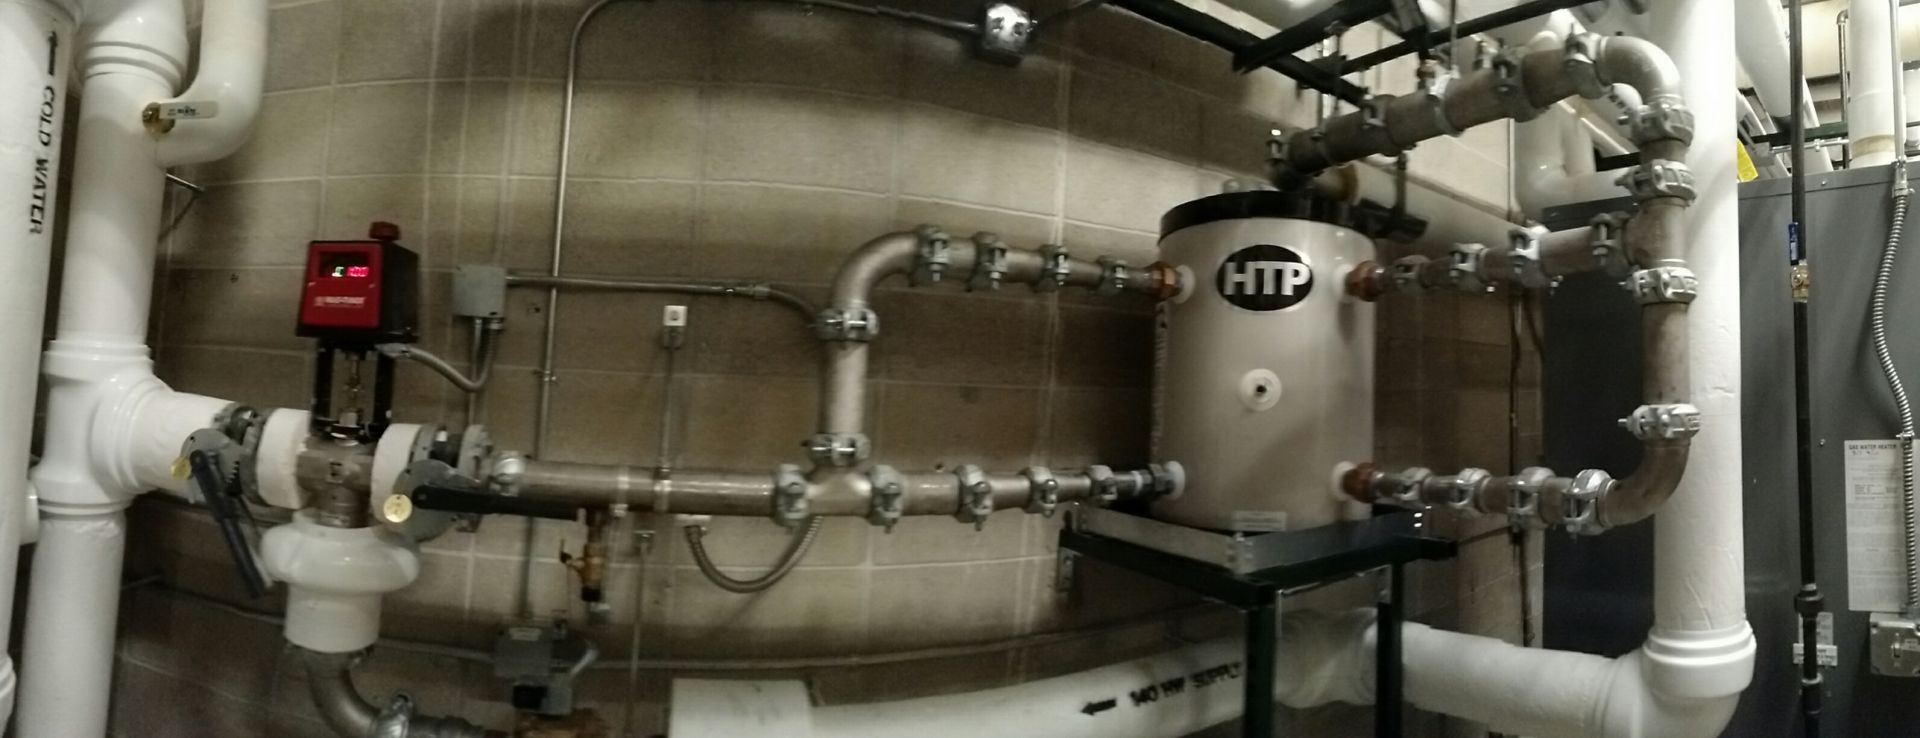 plumbing at Dodge County Justice Facility